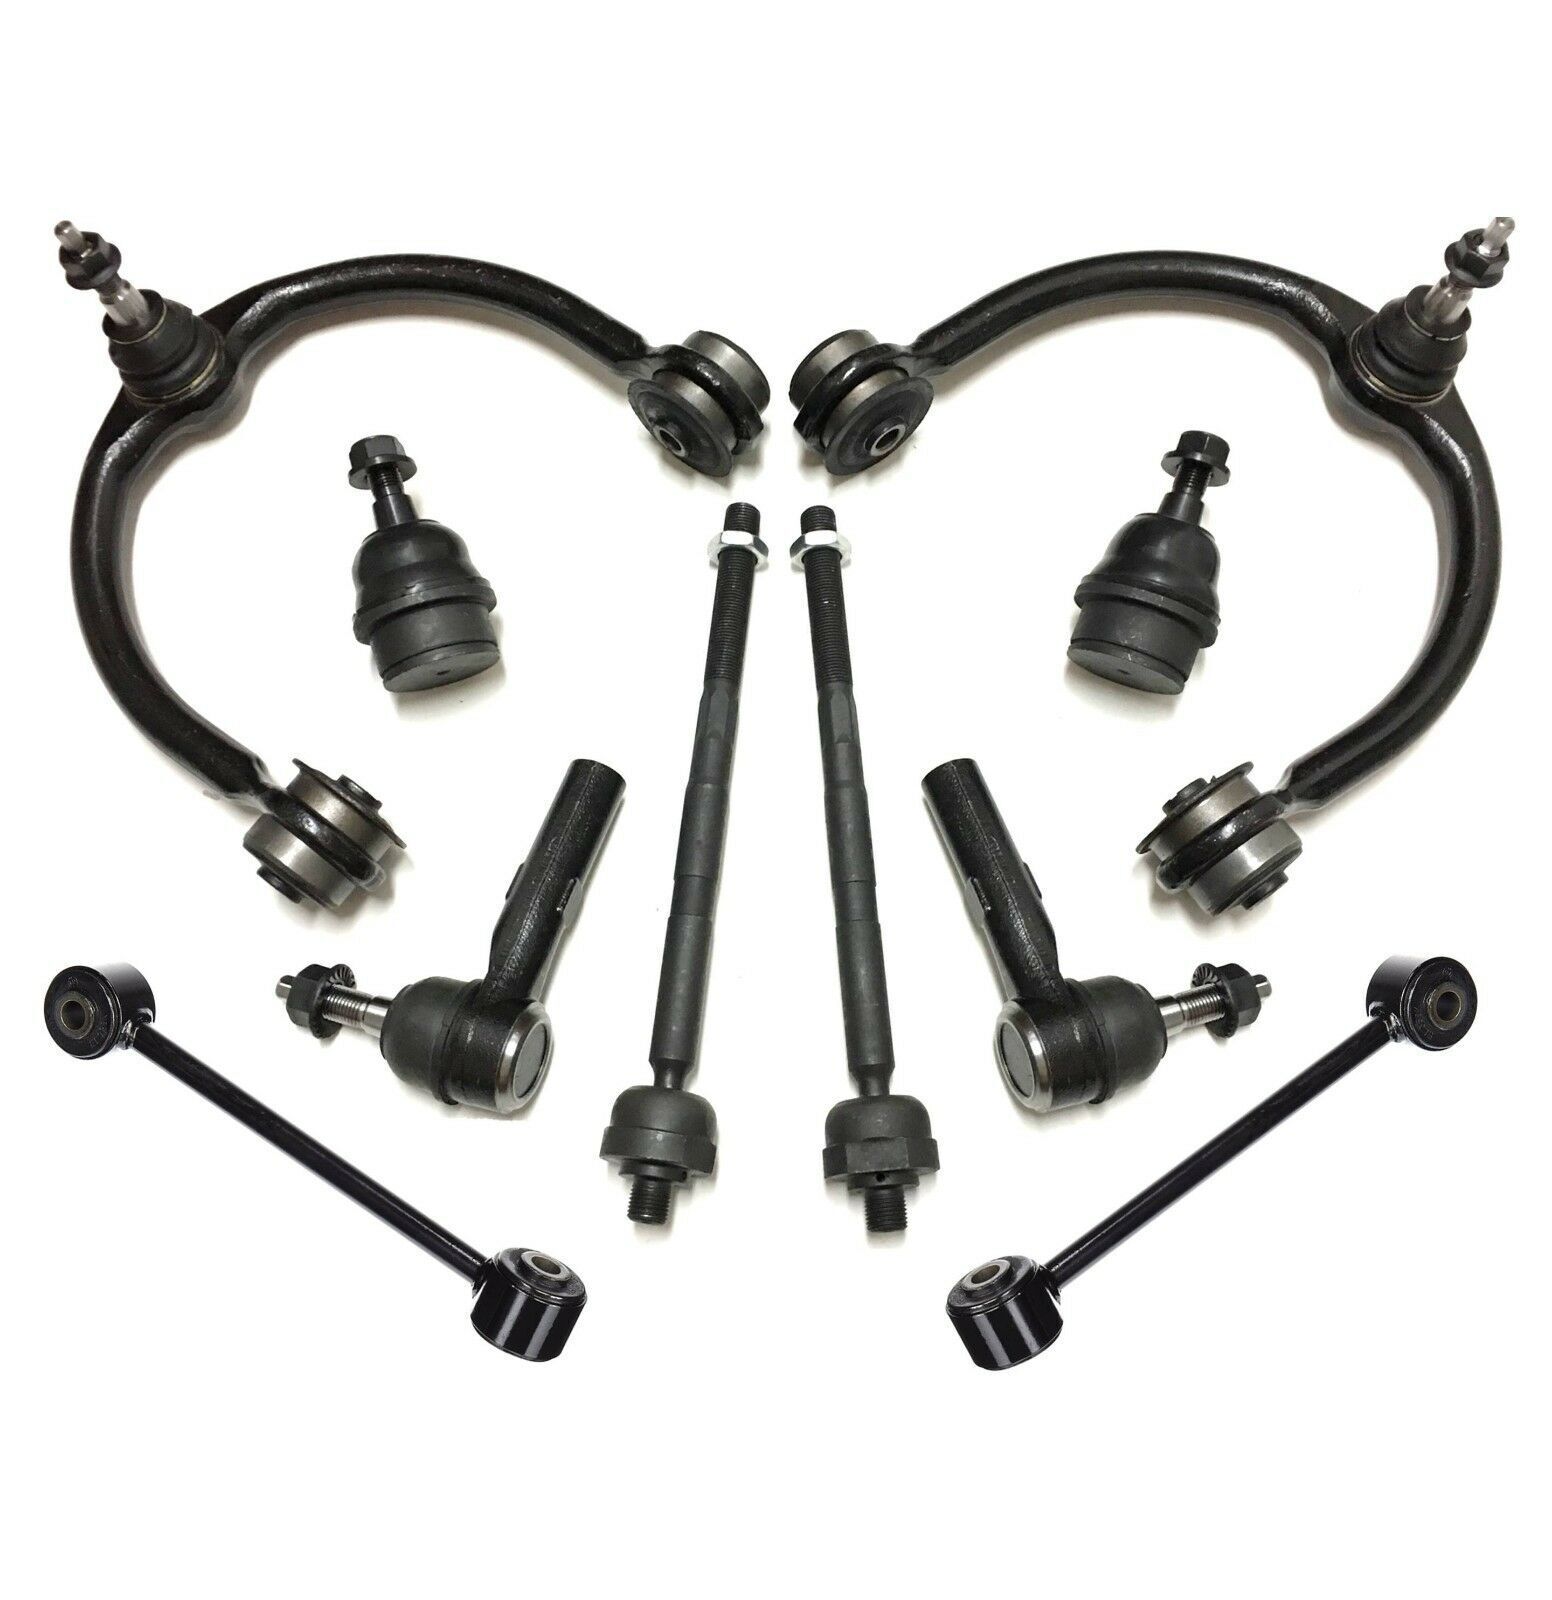 16 Pc New Front Suspension Kit for Commander 2006-2010 Grand Cherokee 2005-2010